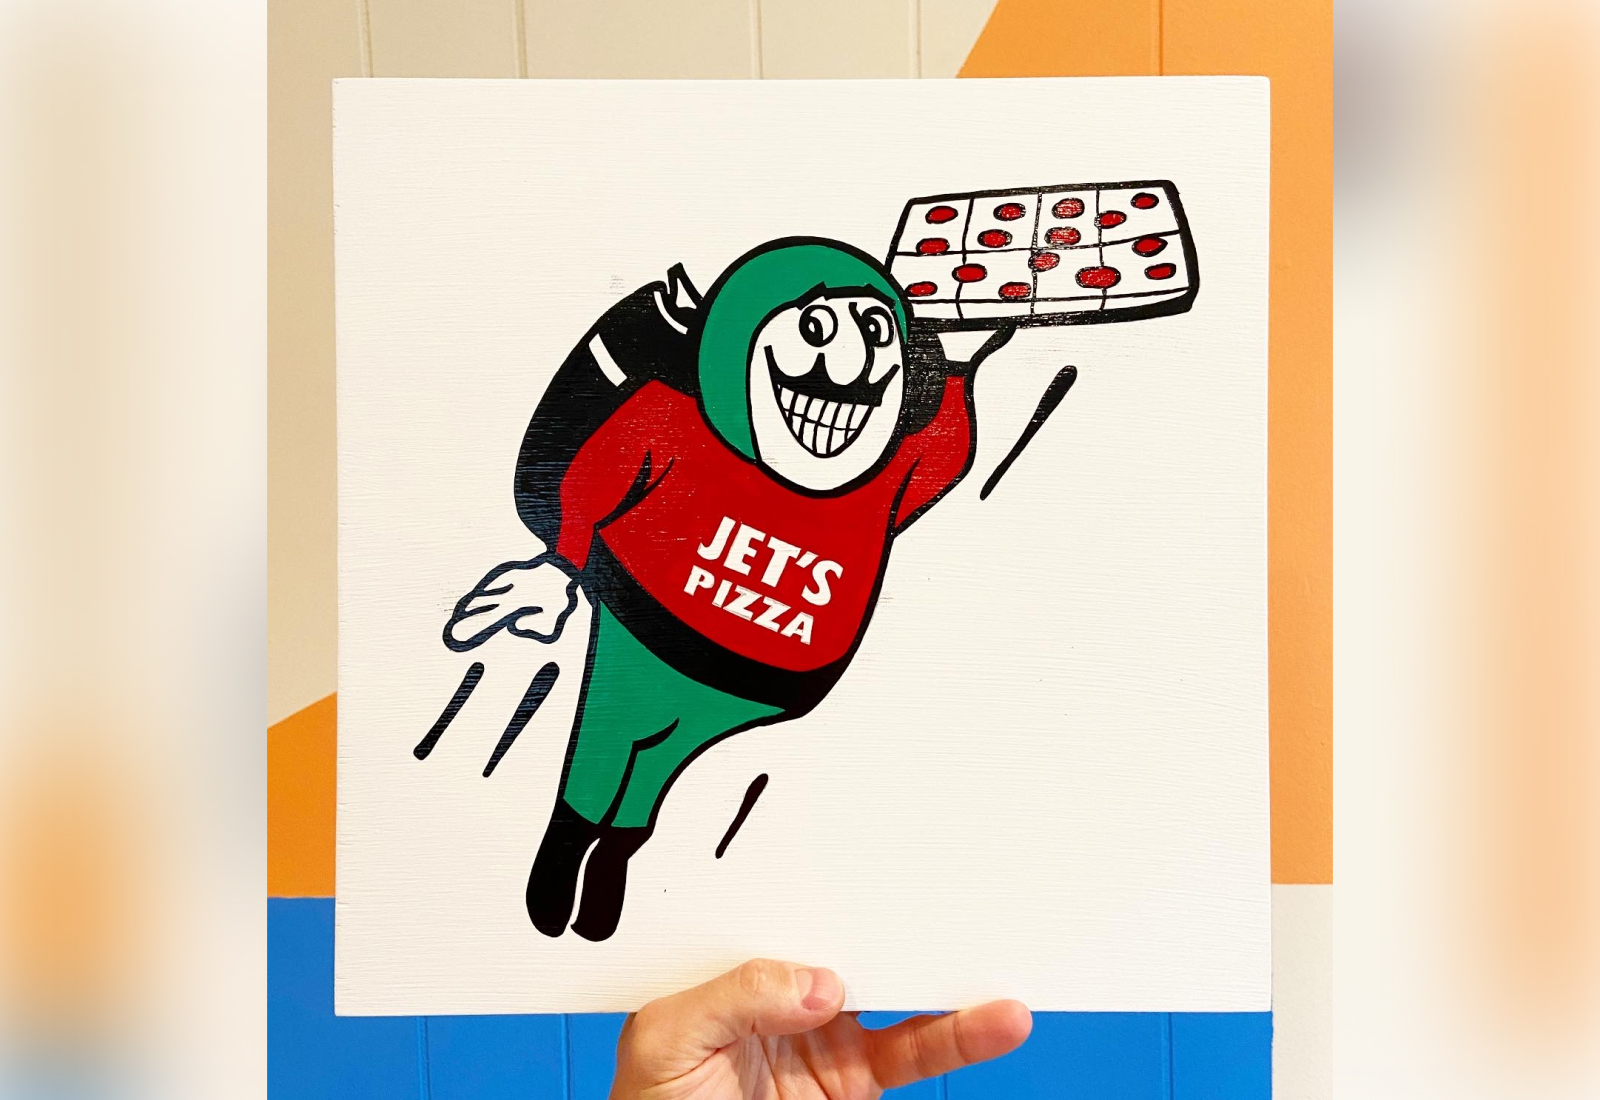 Jet's Pizza Jetman | Hand Painted Sign by Joey Carty